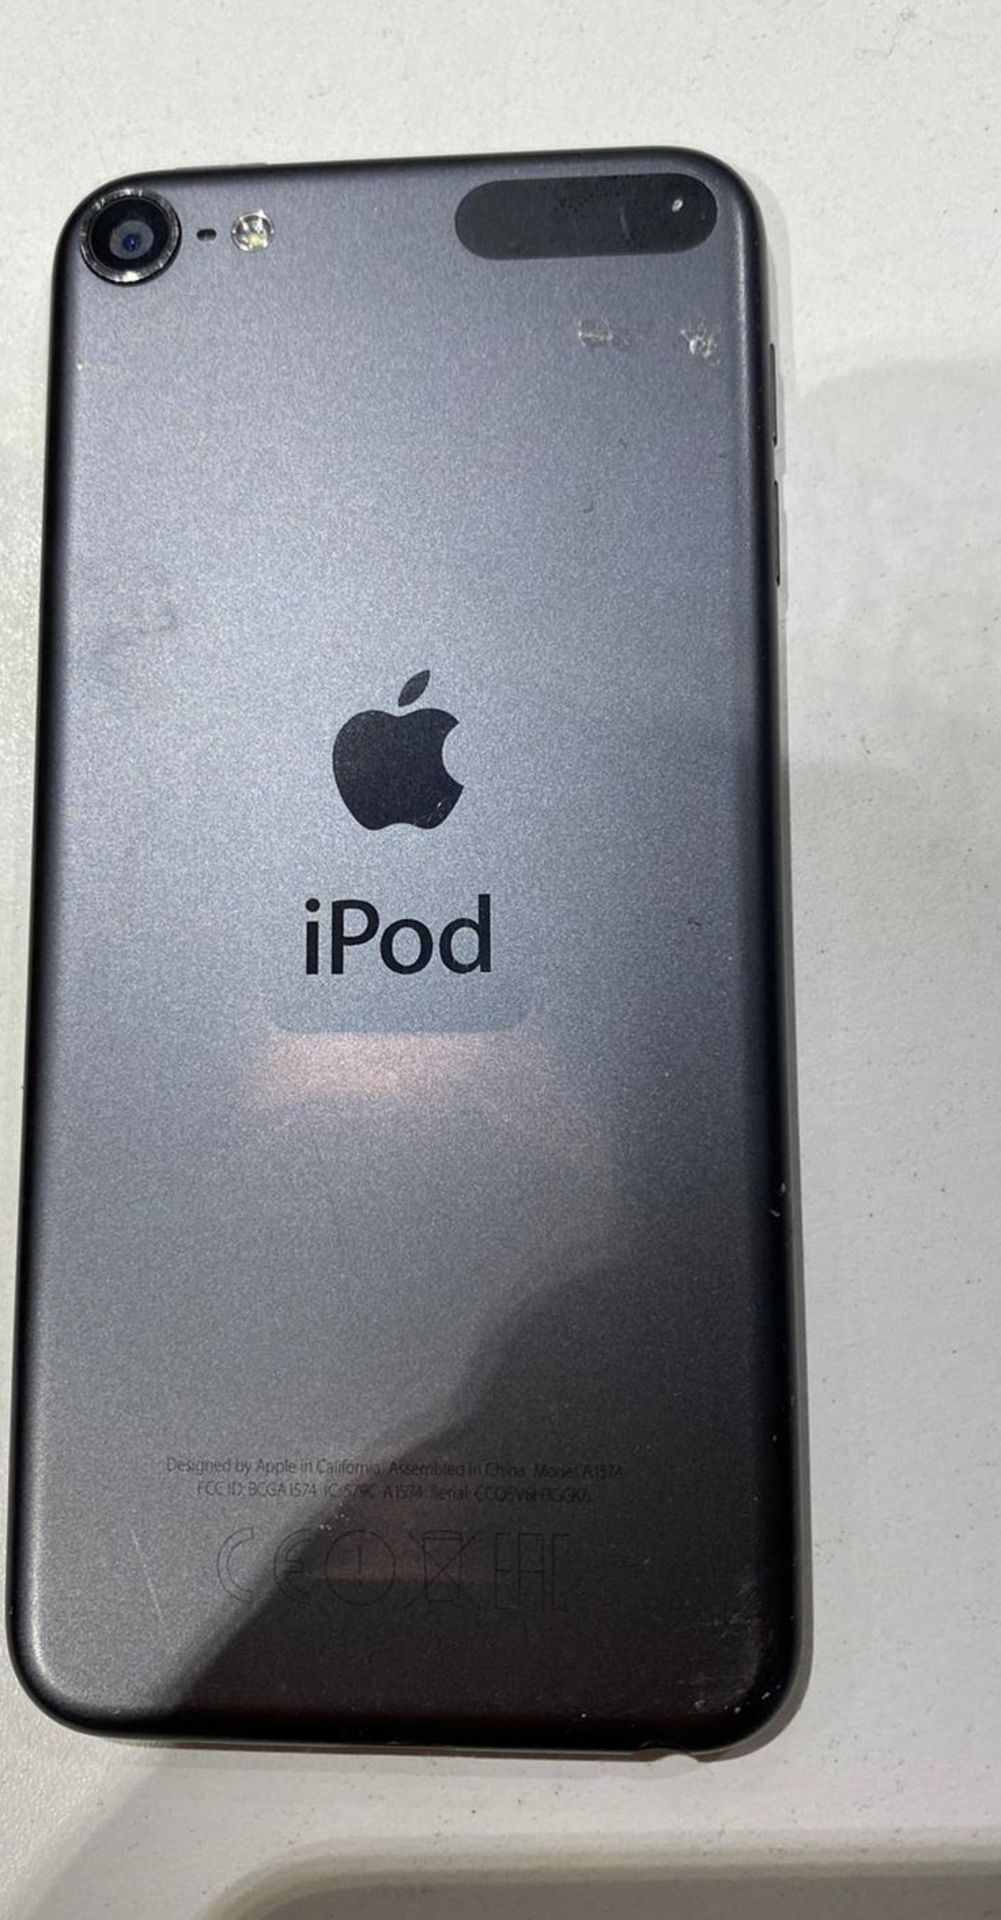 3 x iPod Touch 6th Generation in Space grey - Used condition - Location: Altrincham WA14 - Image 4 of 8